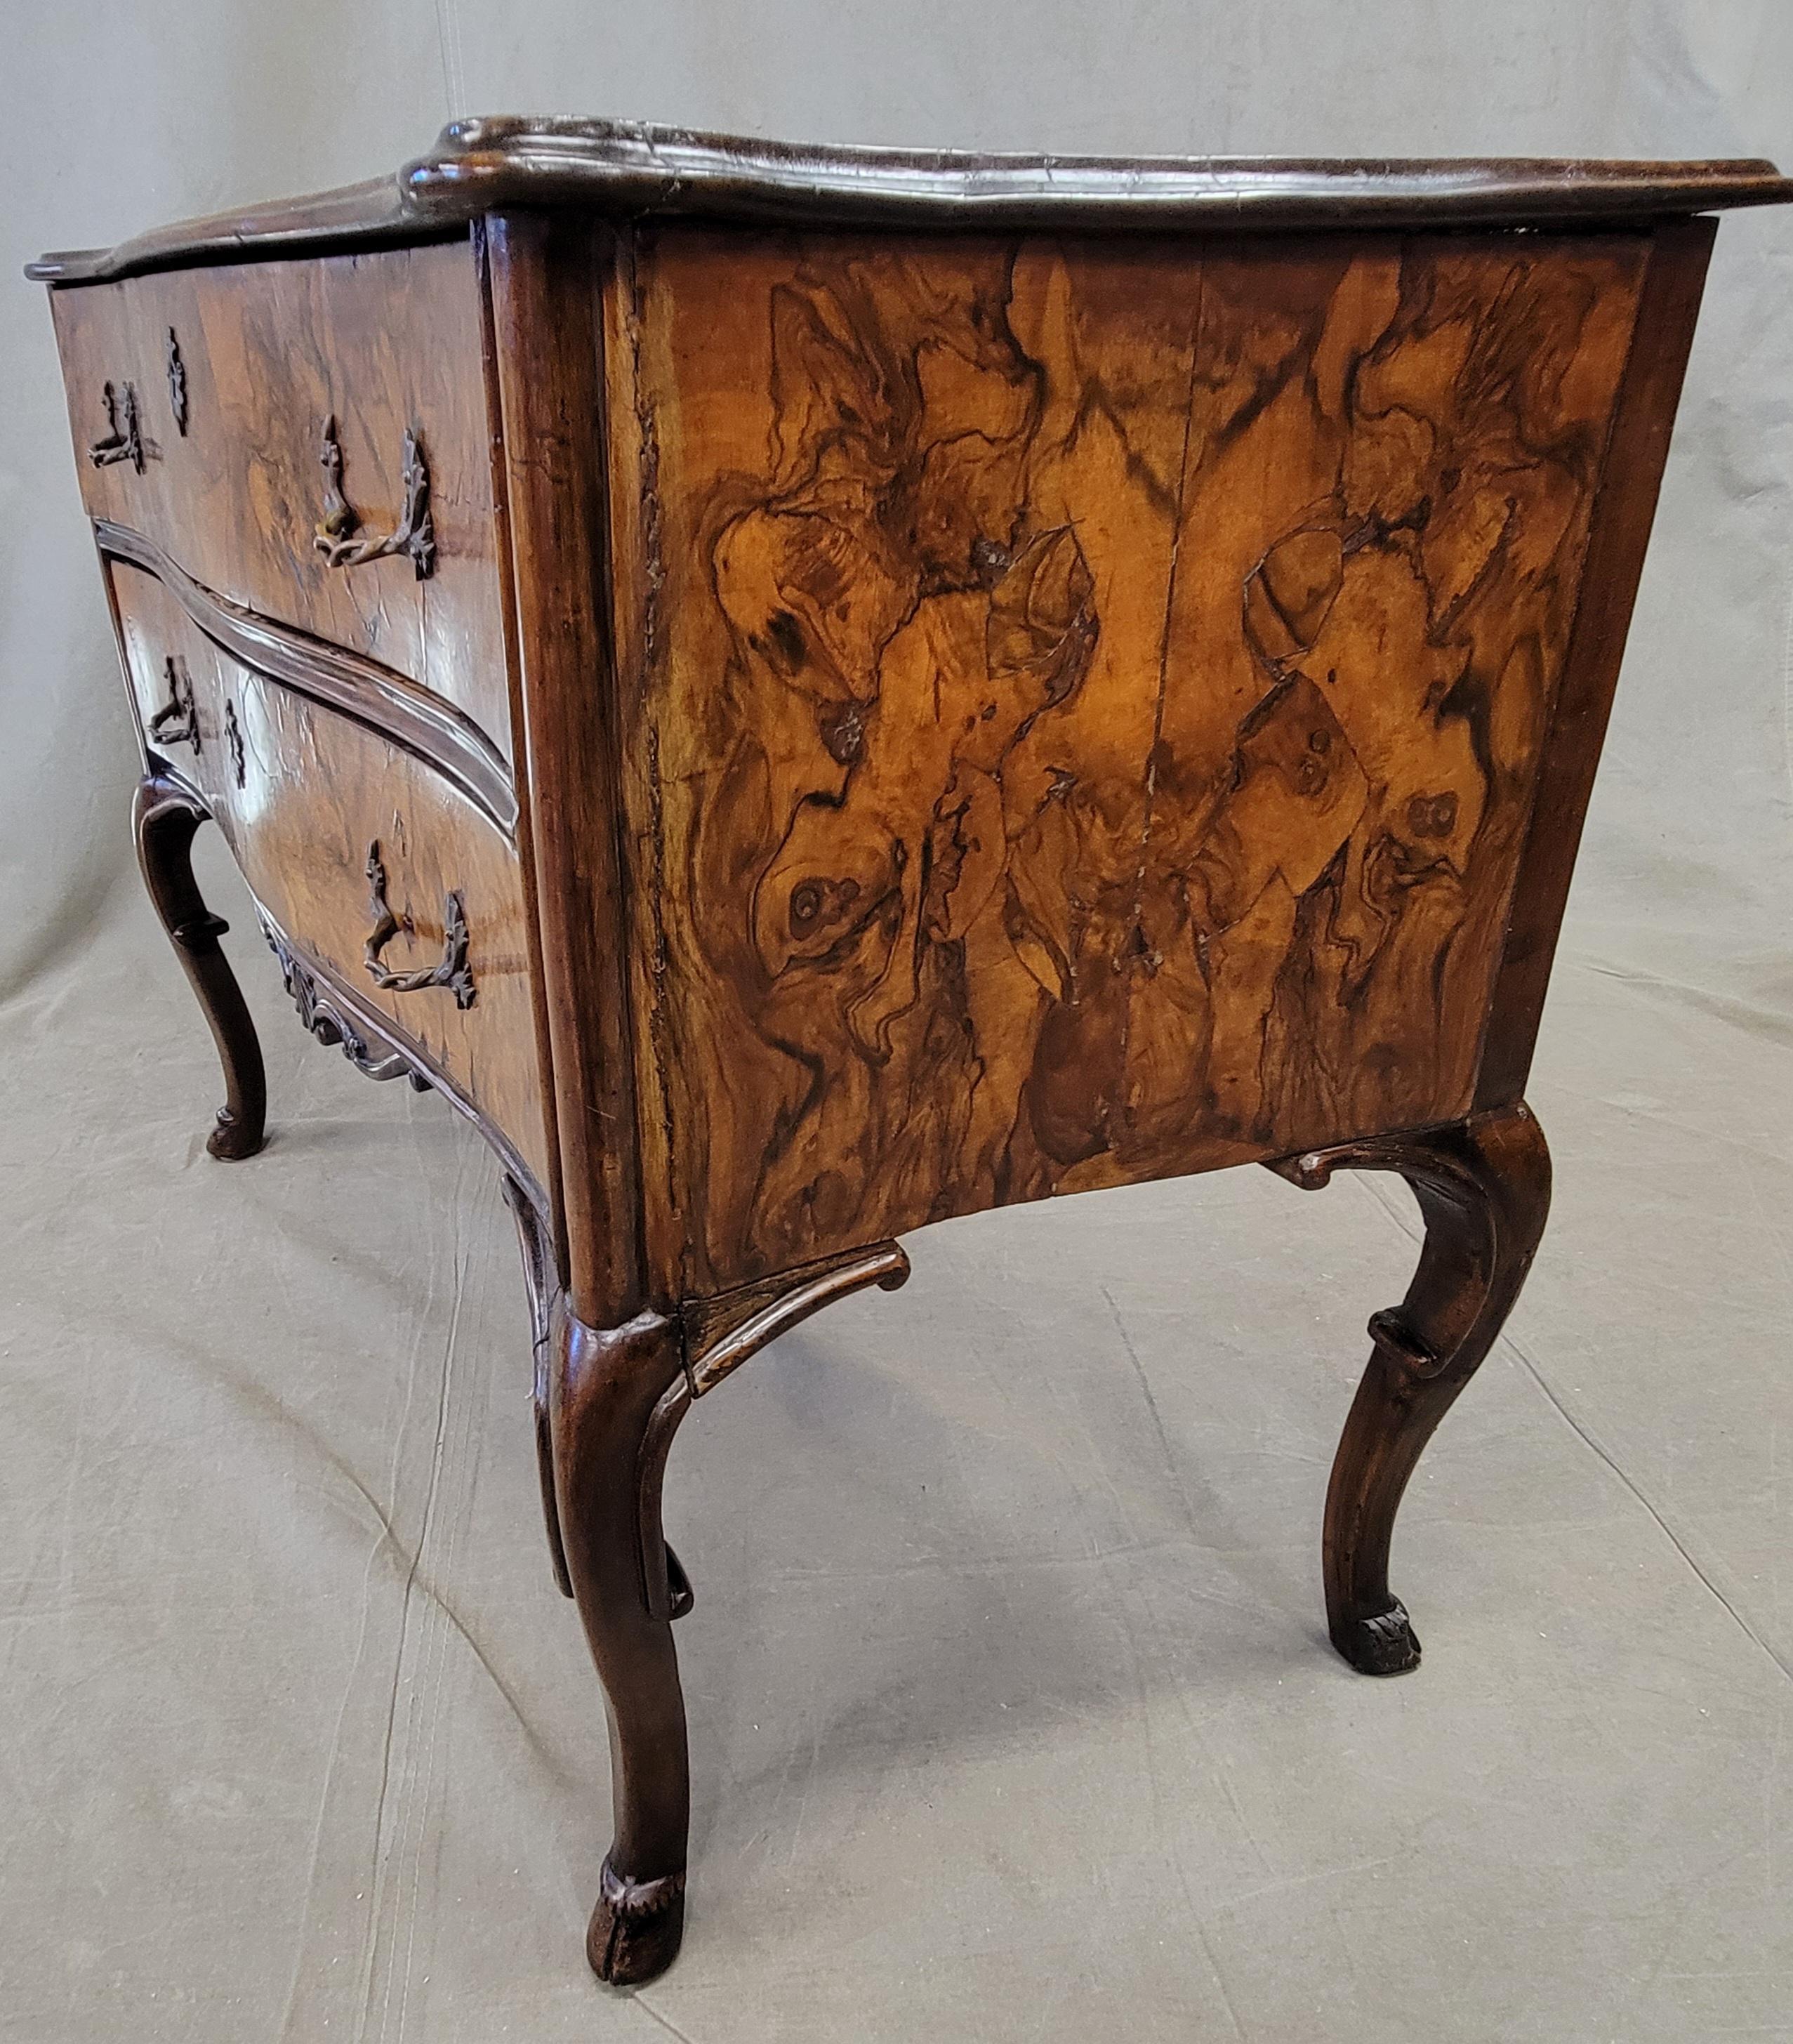 Antique Early 1800s French Burl Walnut Commode Sold by B. Altman & Co. New York 4